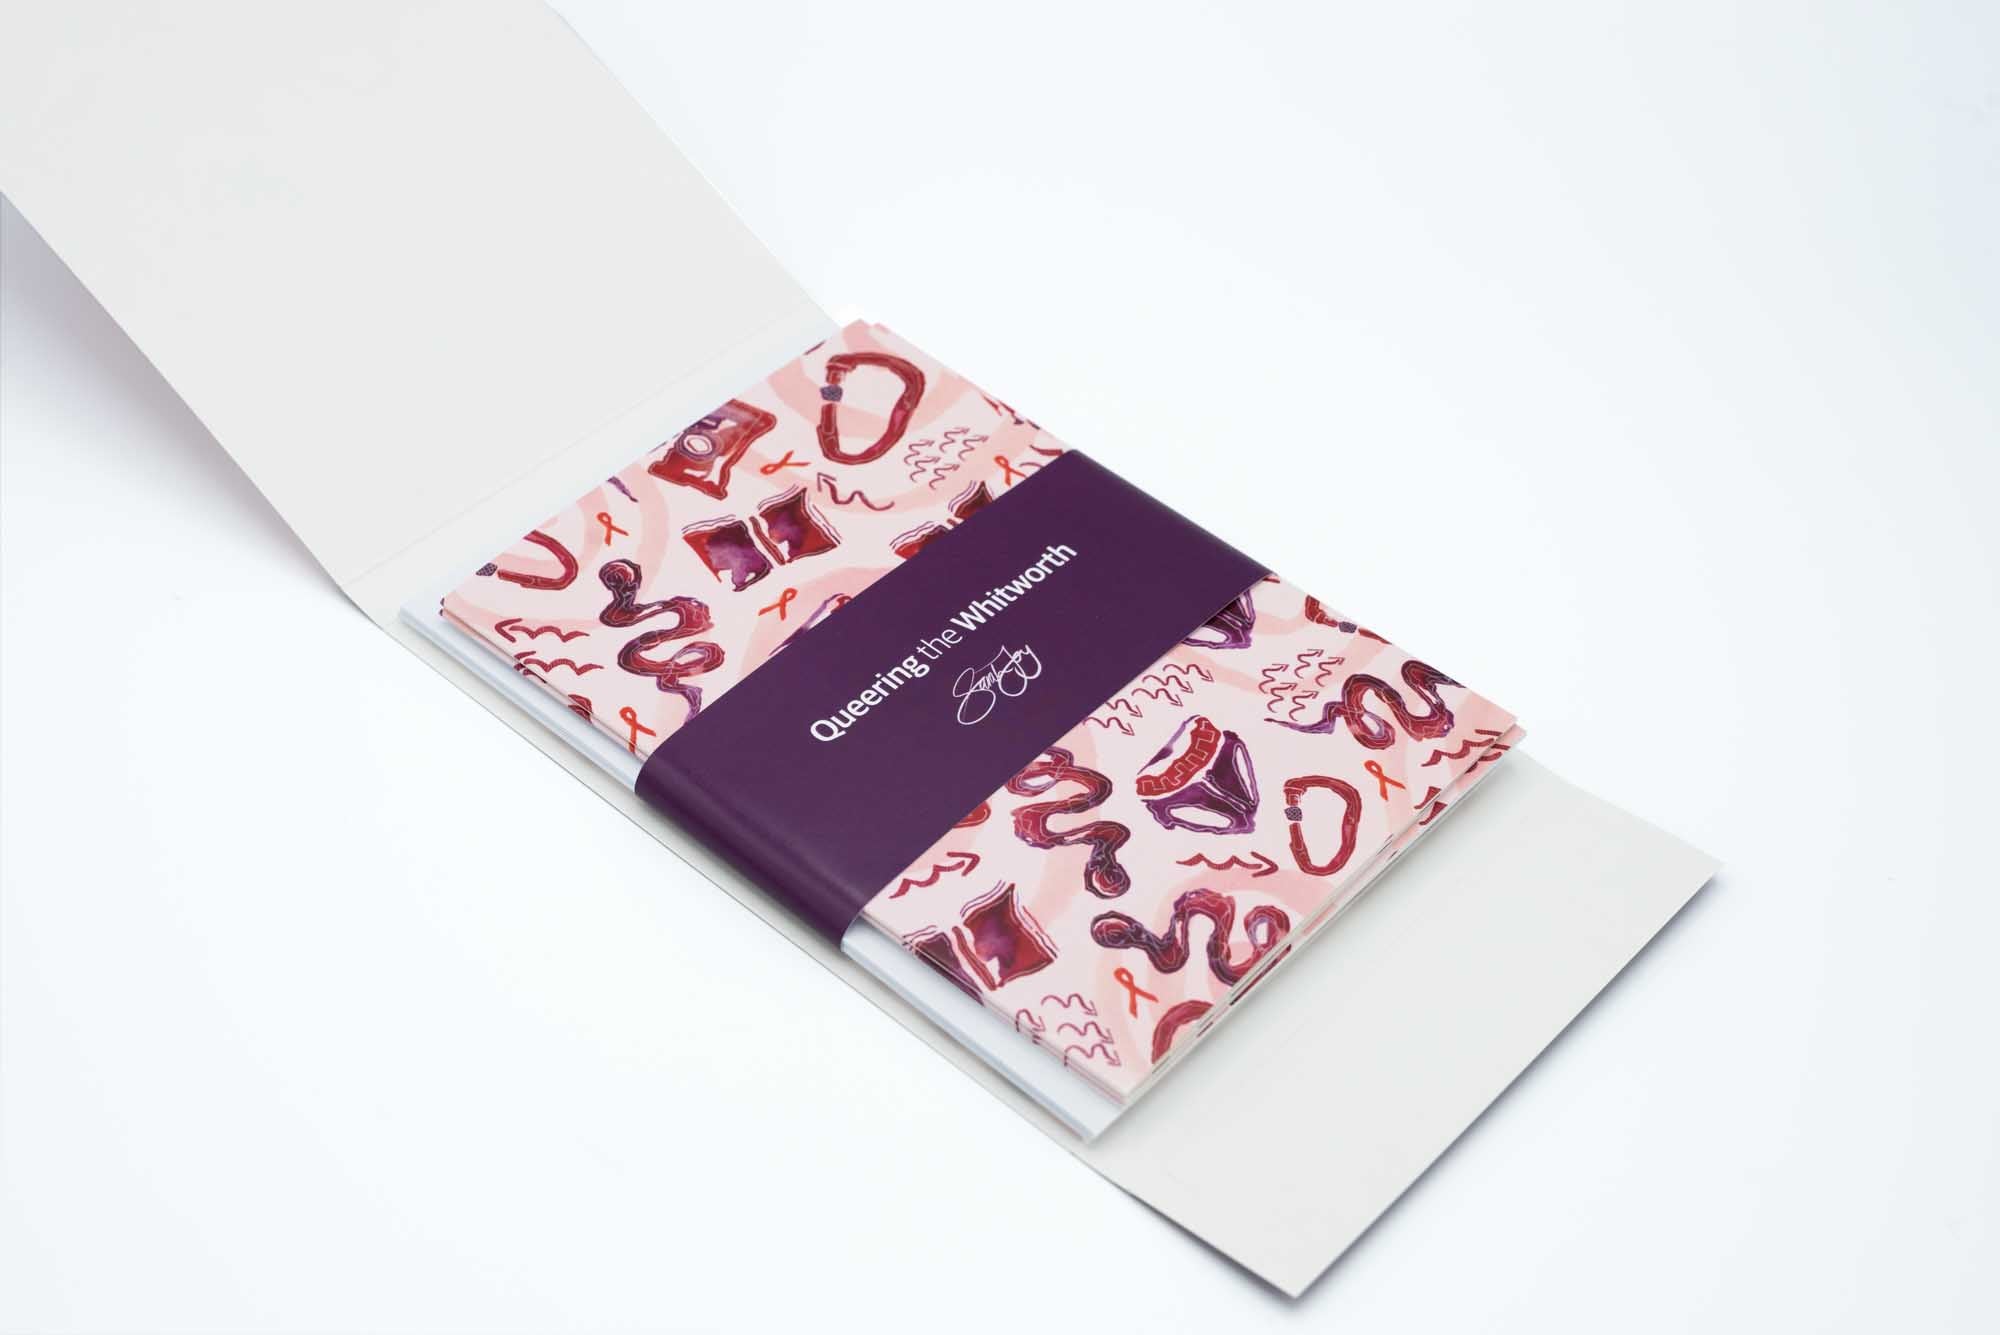 Inside of the greetings card set featuring the cards, envelopes and belly band with Queering the Whitworth branding. White background.